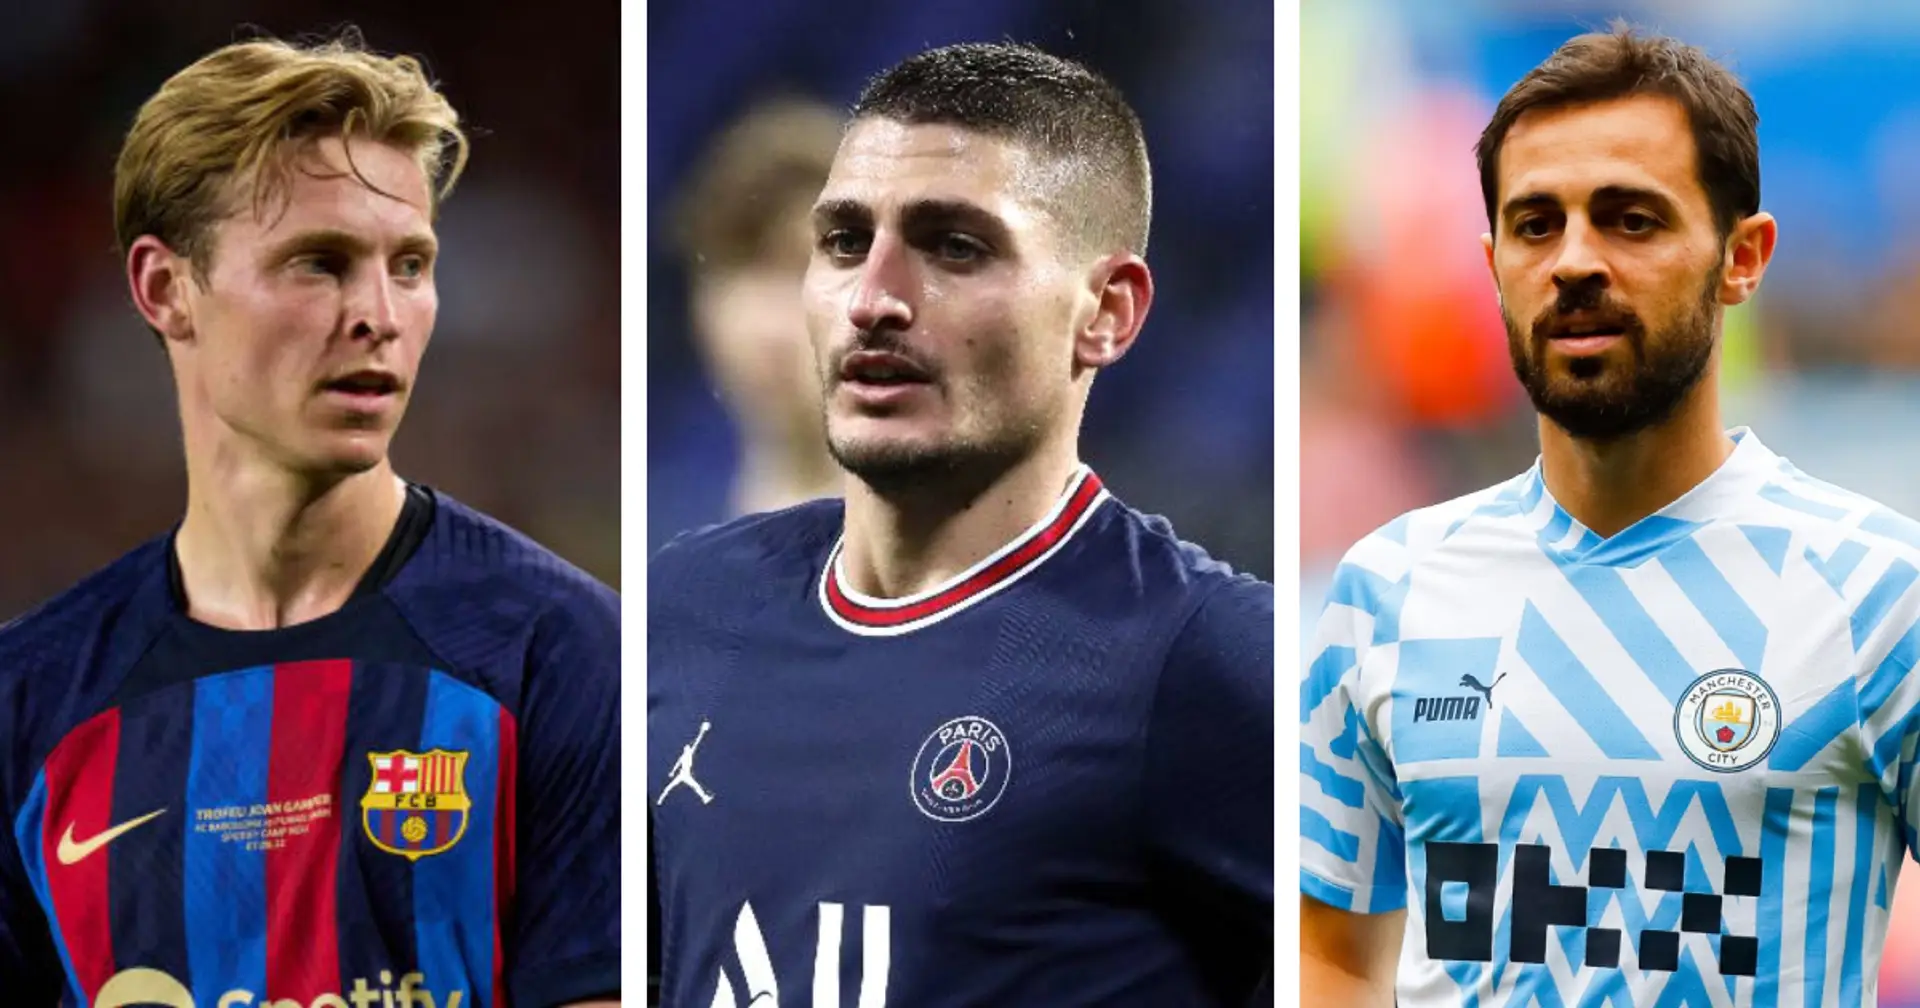 De Jong, Veratti and Bernardo Silva could be involved in 3-way transfer — Man United not in the mix